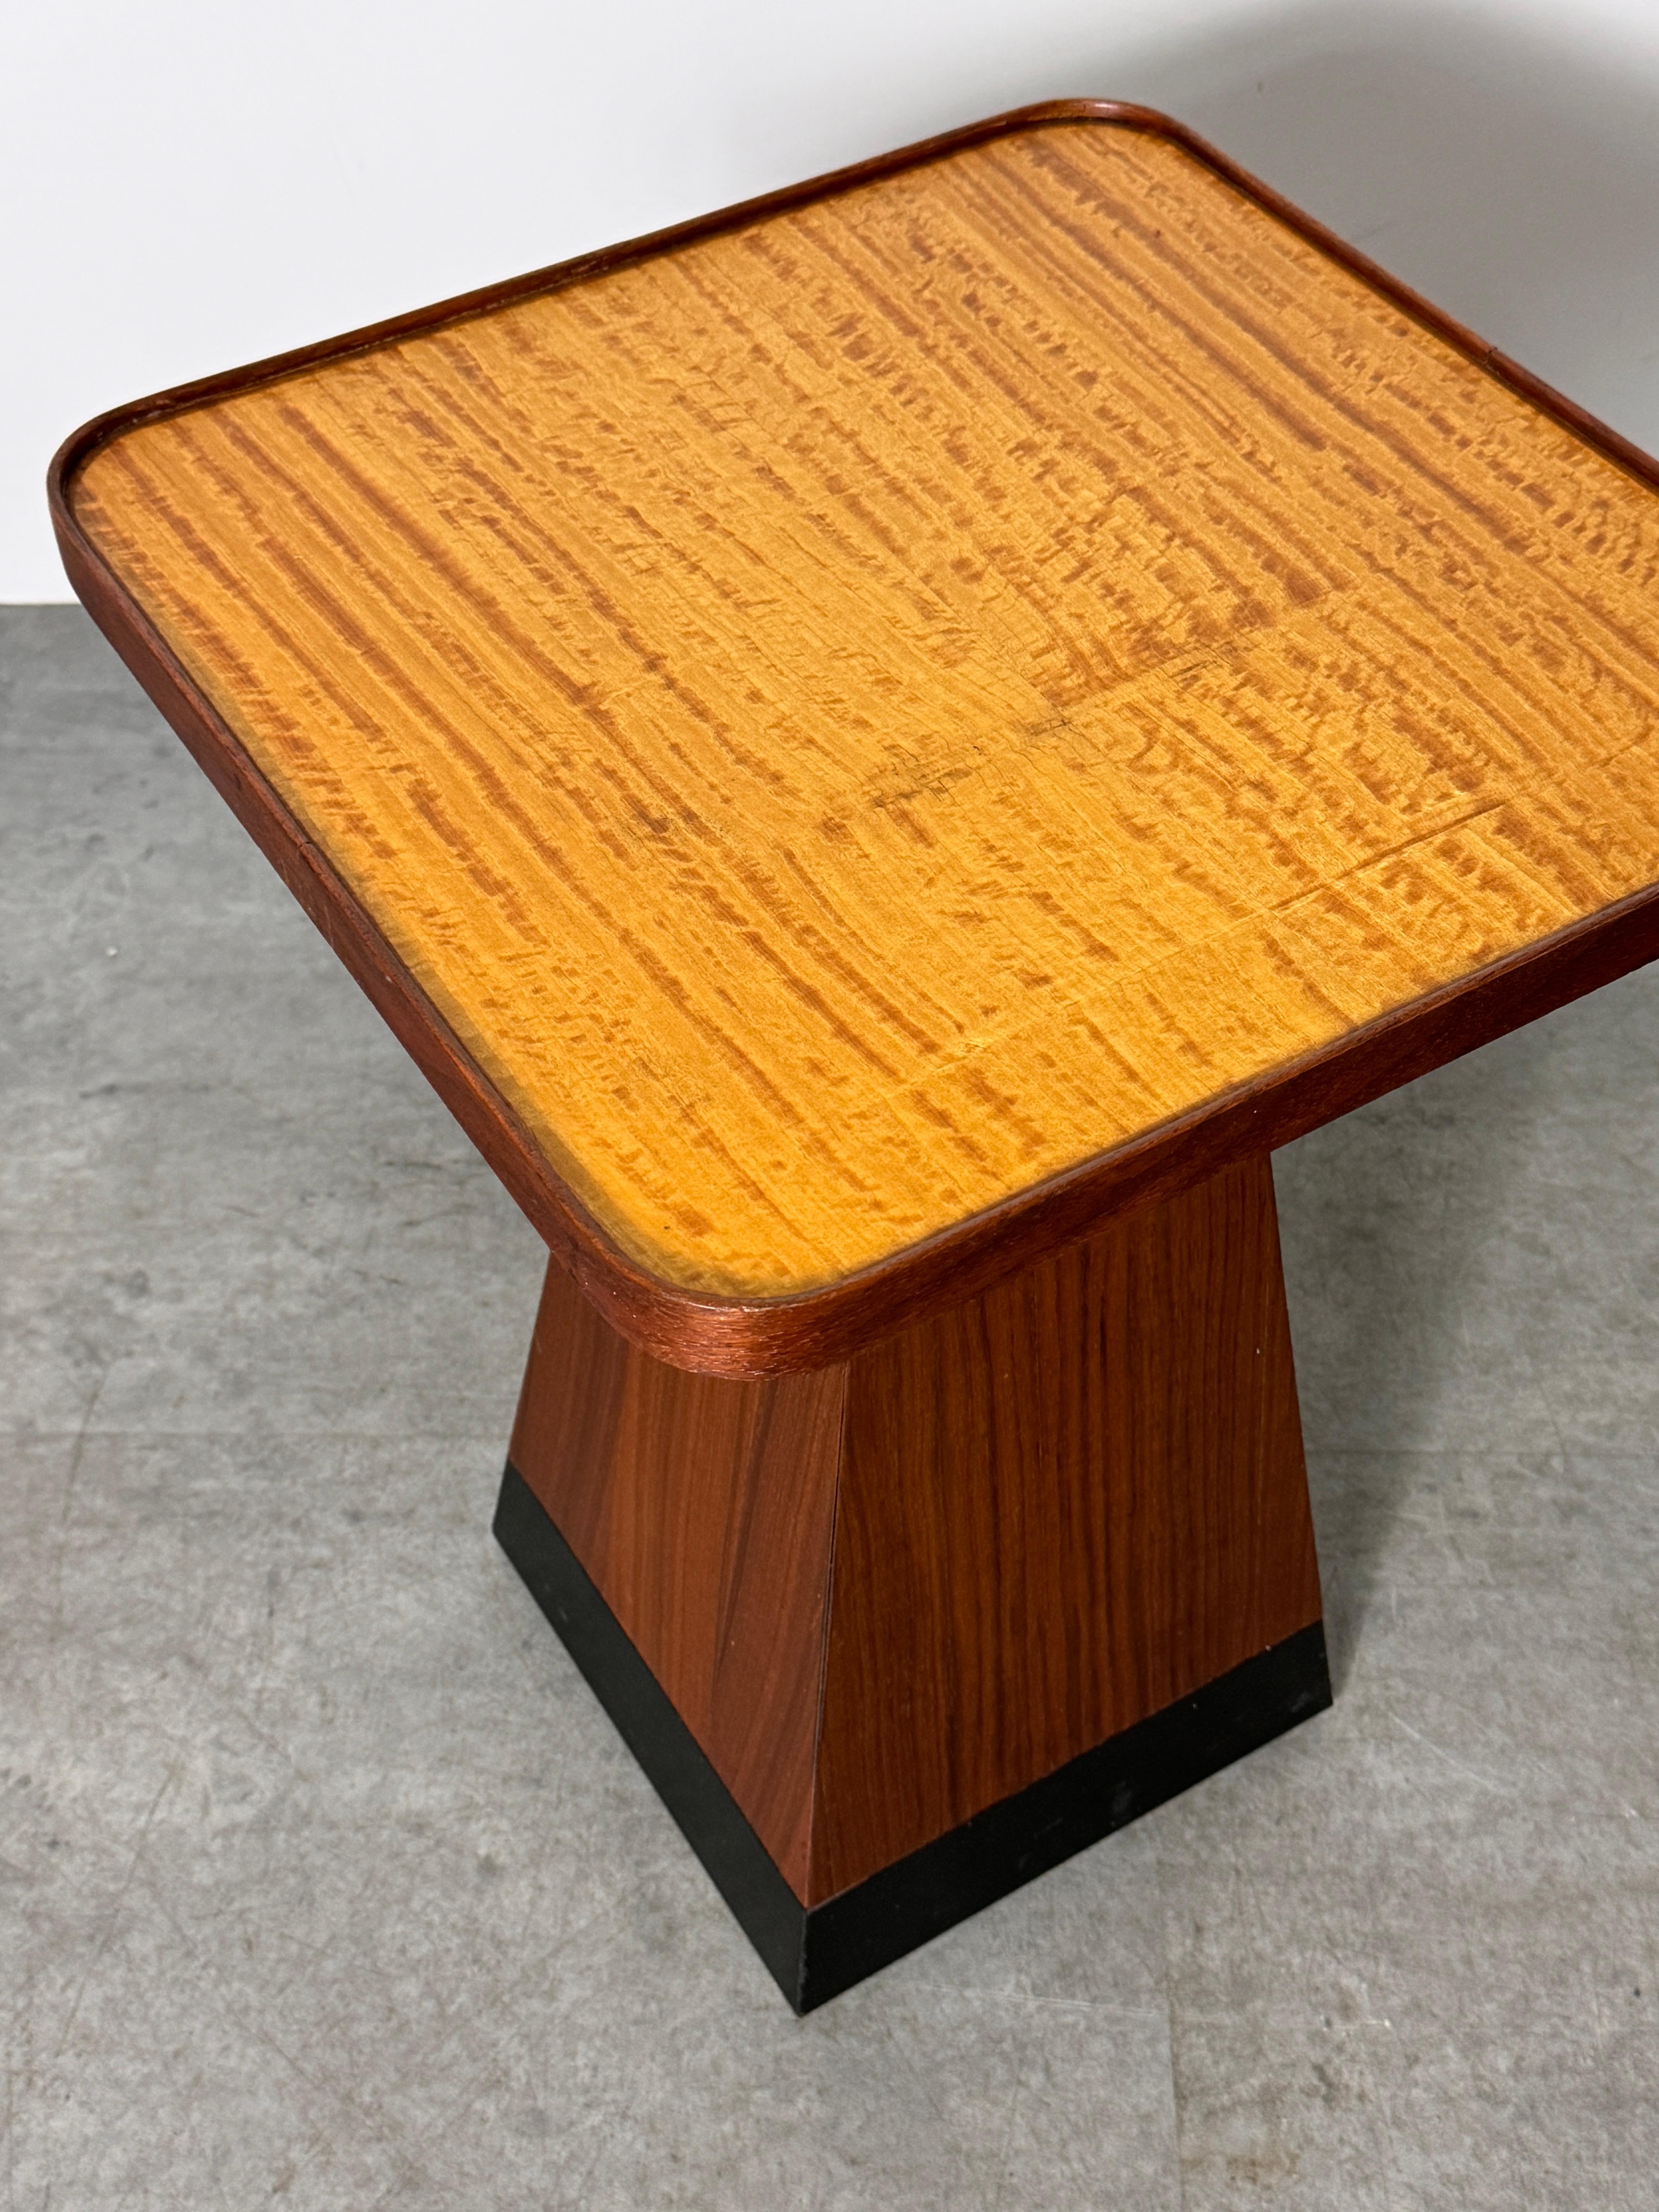 Mid Century Modern Walnut Satinwood Square Pyramid Side Pedestal Table 1970s For Sale 1